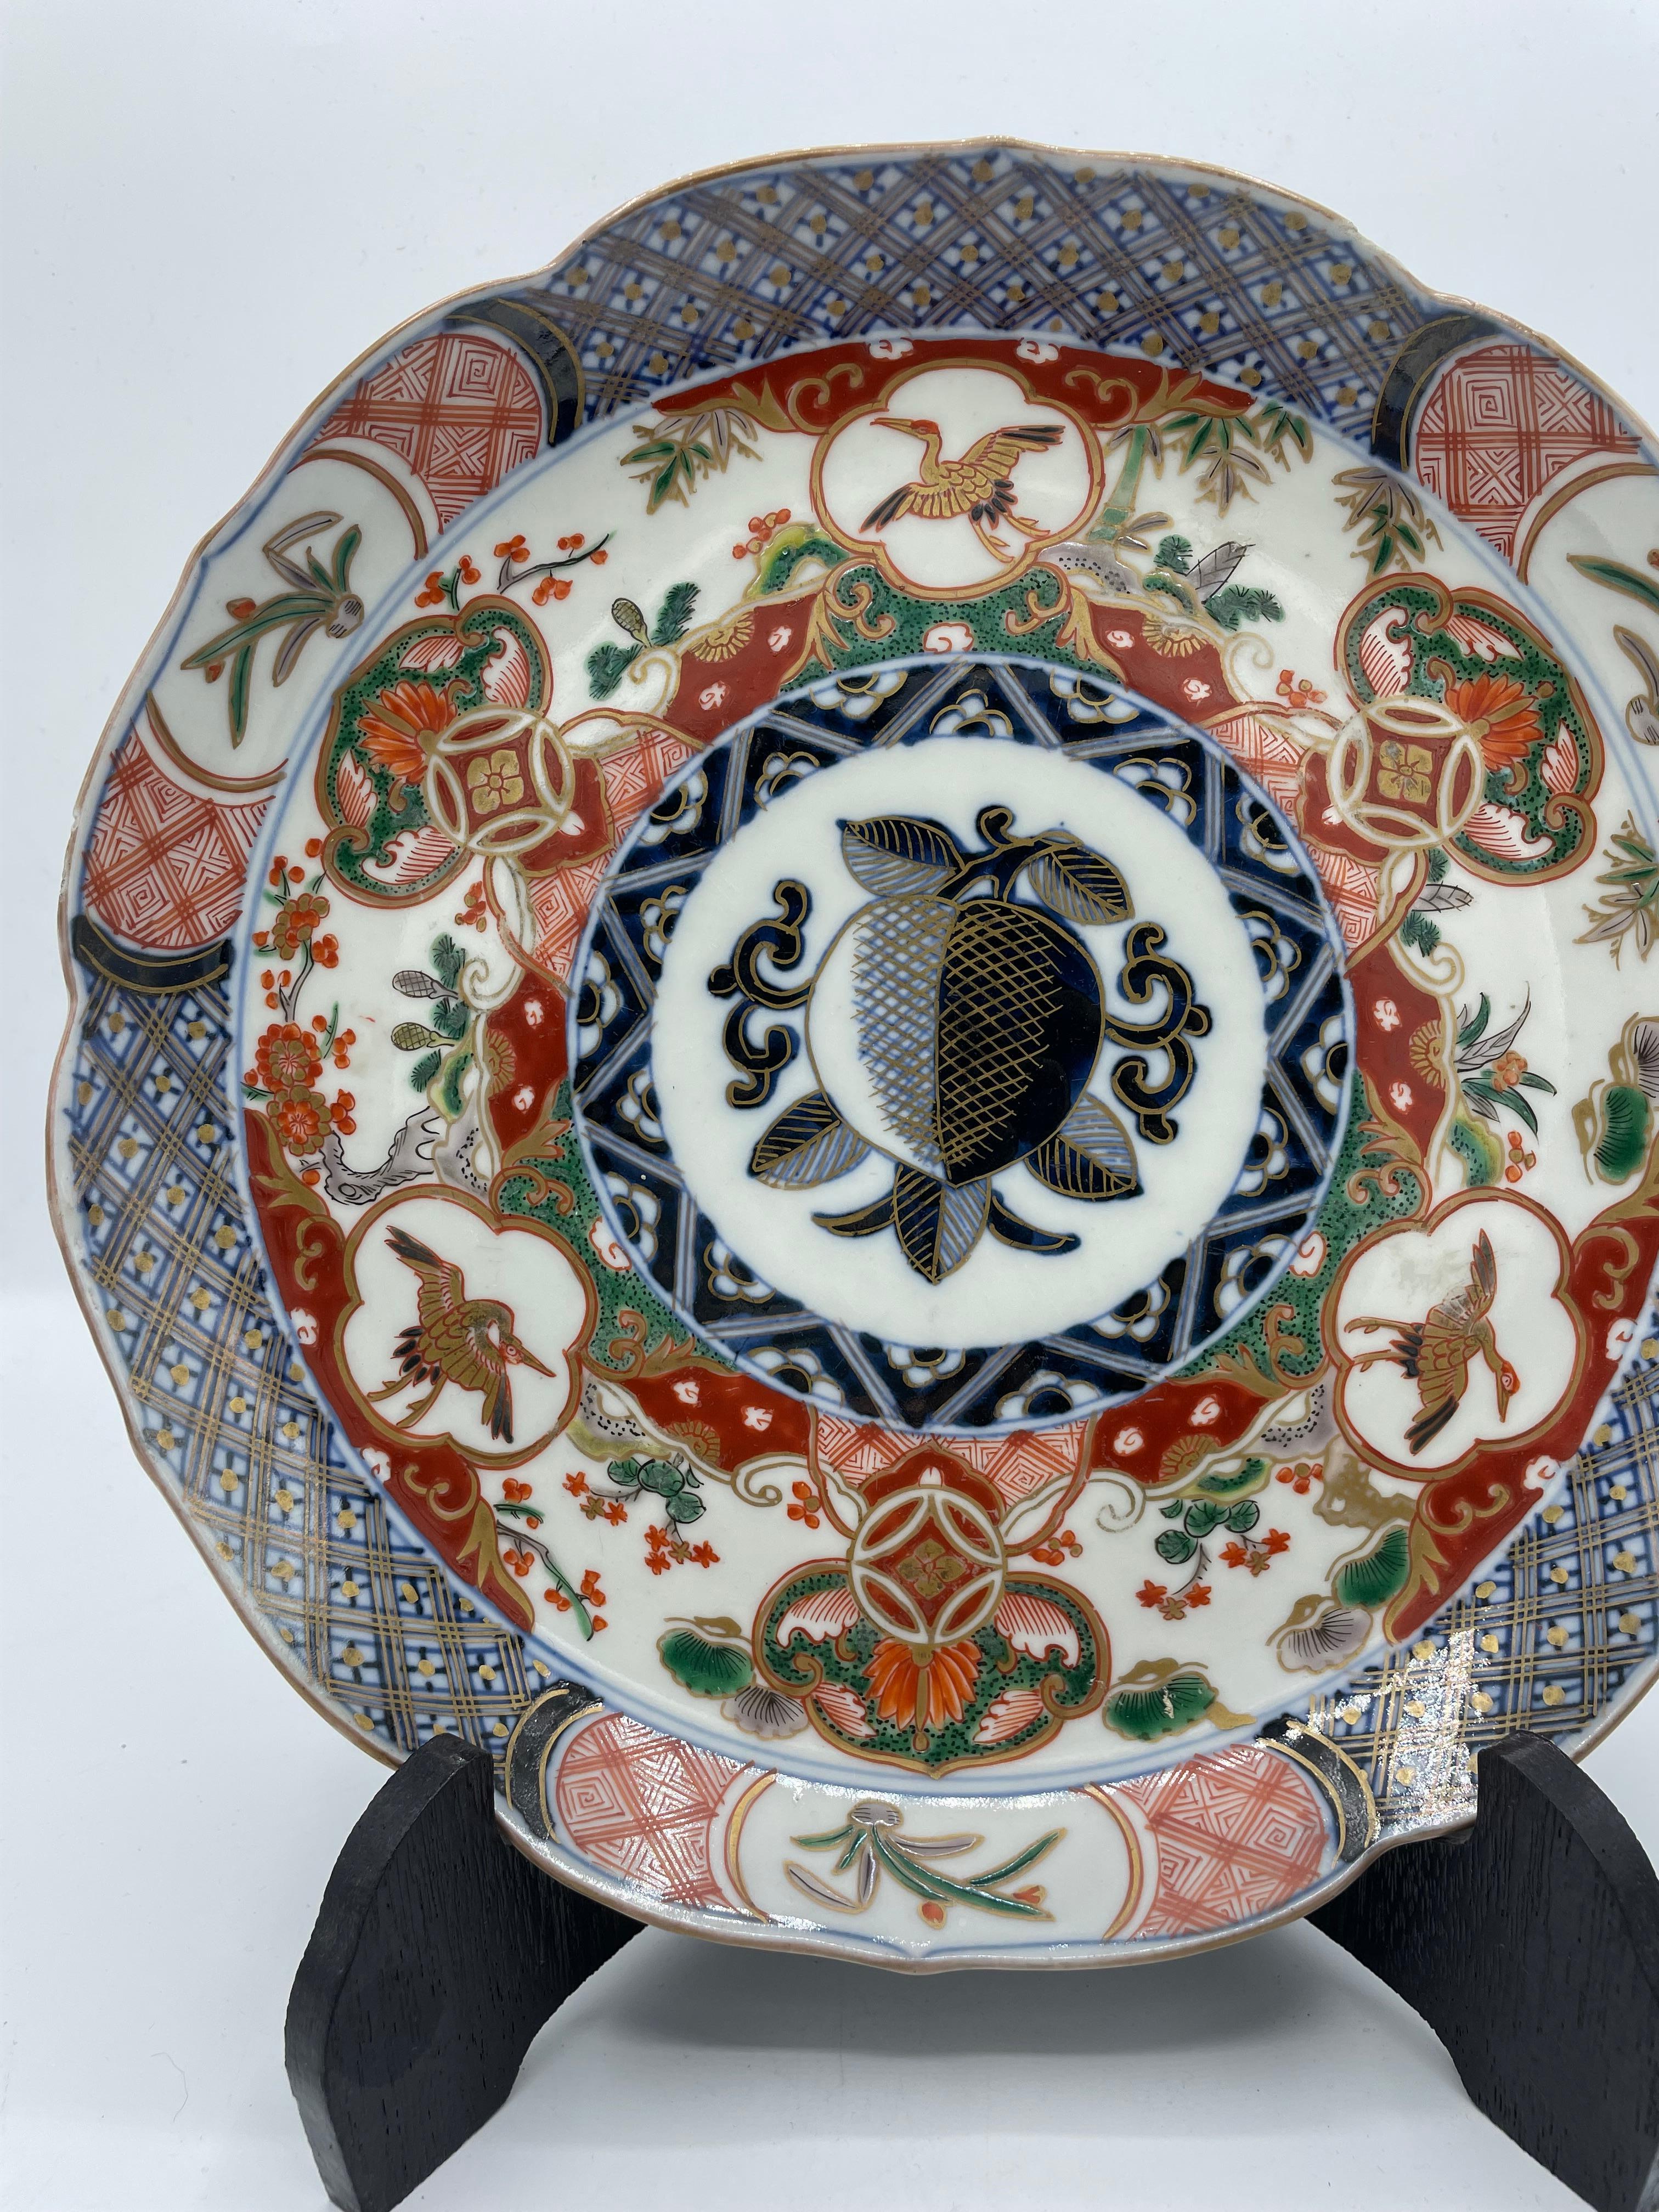 This is a plate which was made in Japan in Showa era (around 1960s).
It was made with Imari yaki technique.

Imari ware is a Western term for a brightly-coloured style of Arita ware. Japanese export porcelain made in the area of Arita, in the